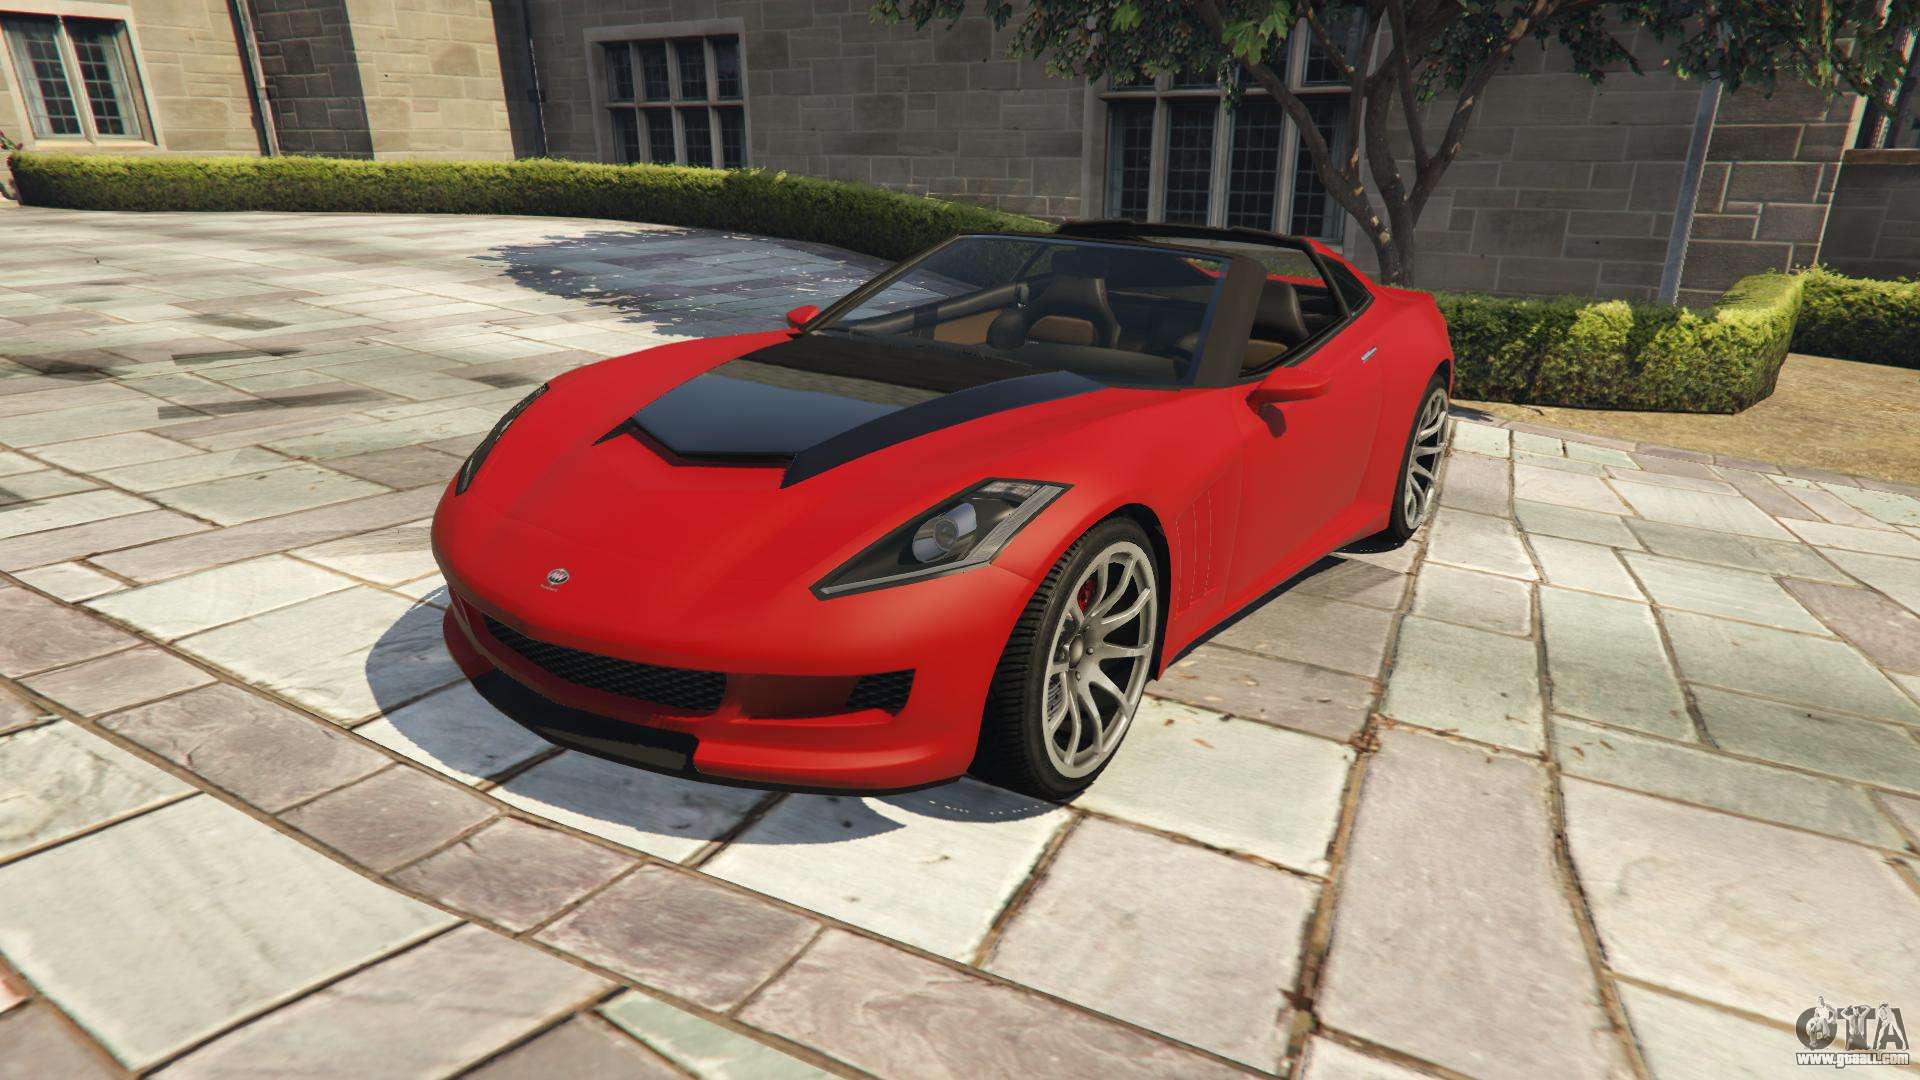 Invetero Coquette from GTA 5 - front view